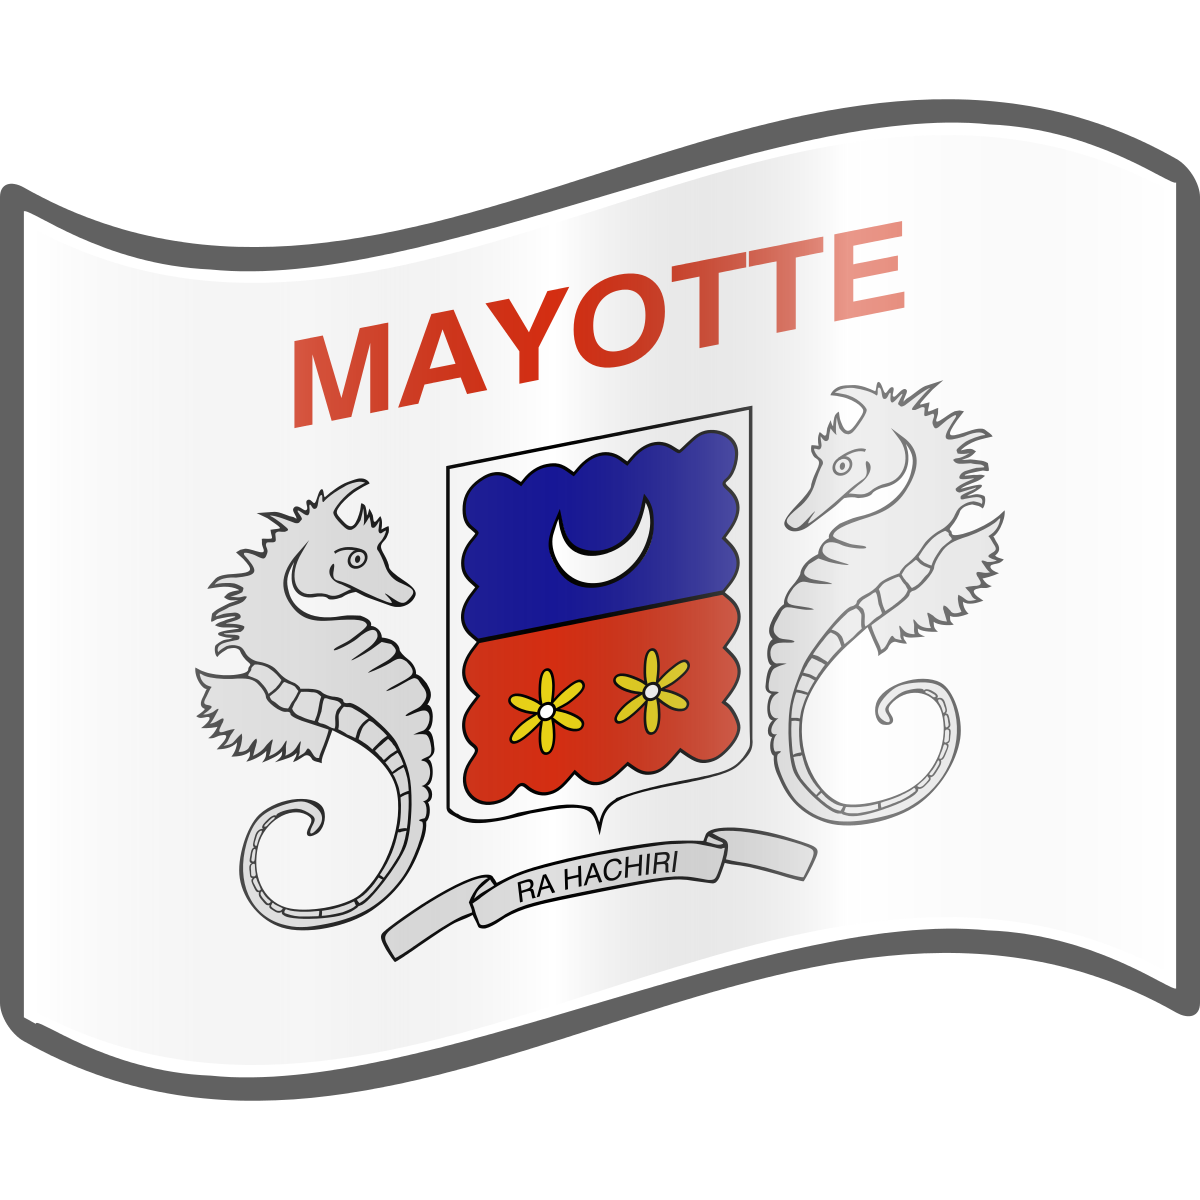 https://upload.wikimedia.org/wikipedia/commons/thumb/f/f8/Nuvola_Mayotte_flag.svg/1200px-Nuvola_Mayotte_flag.svg.png